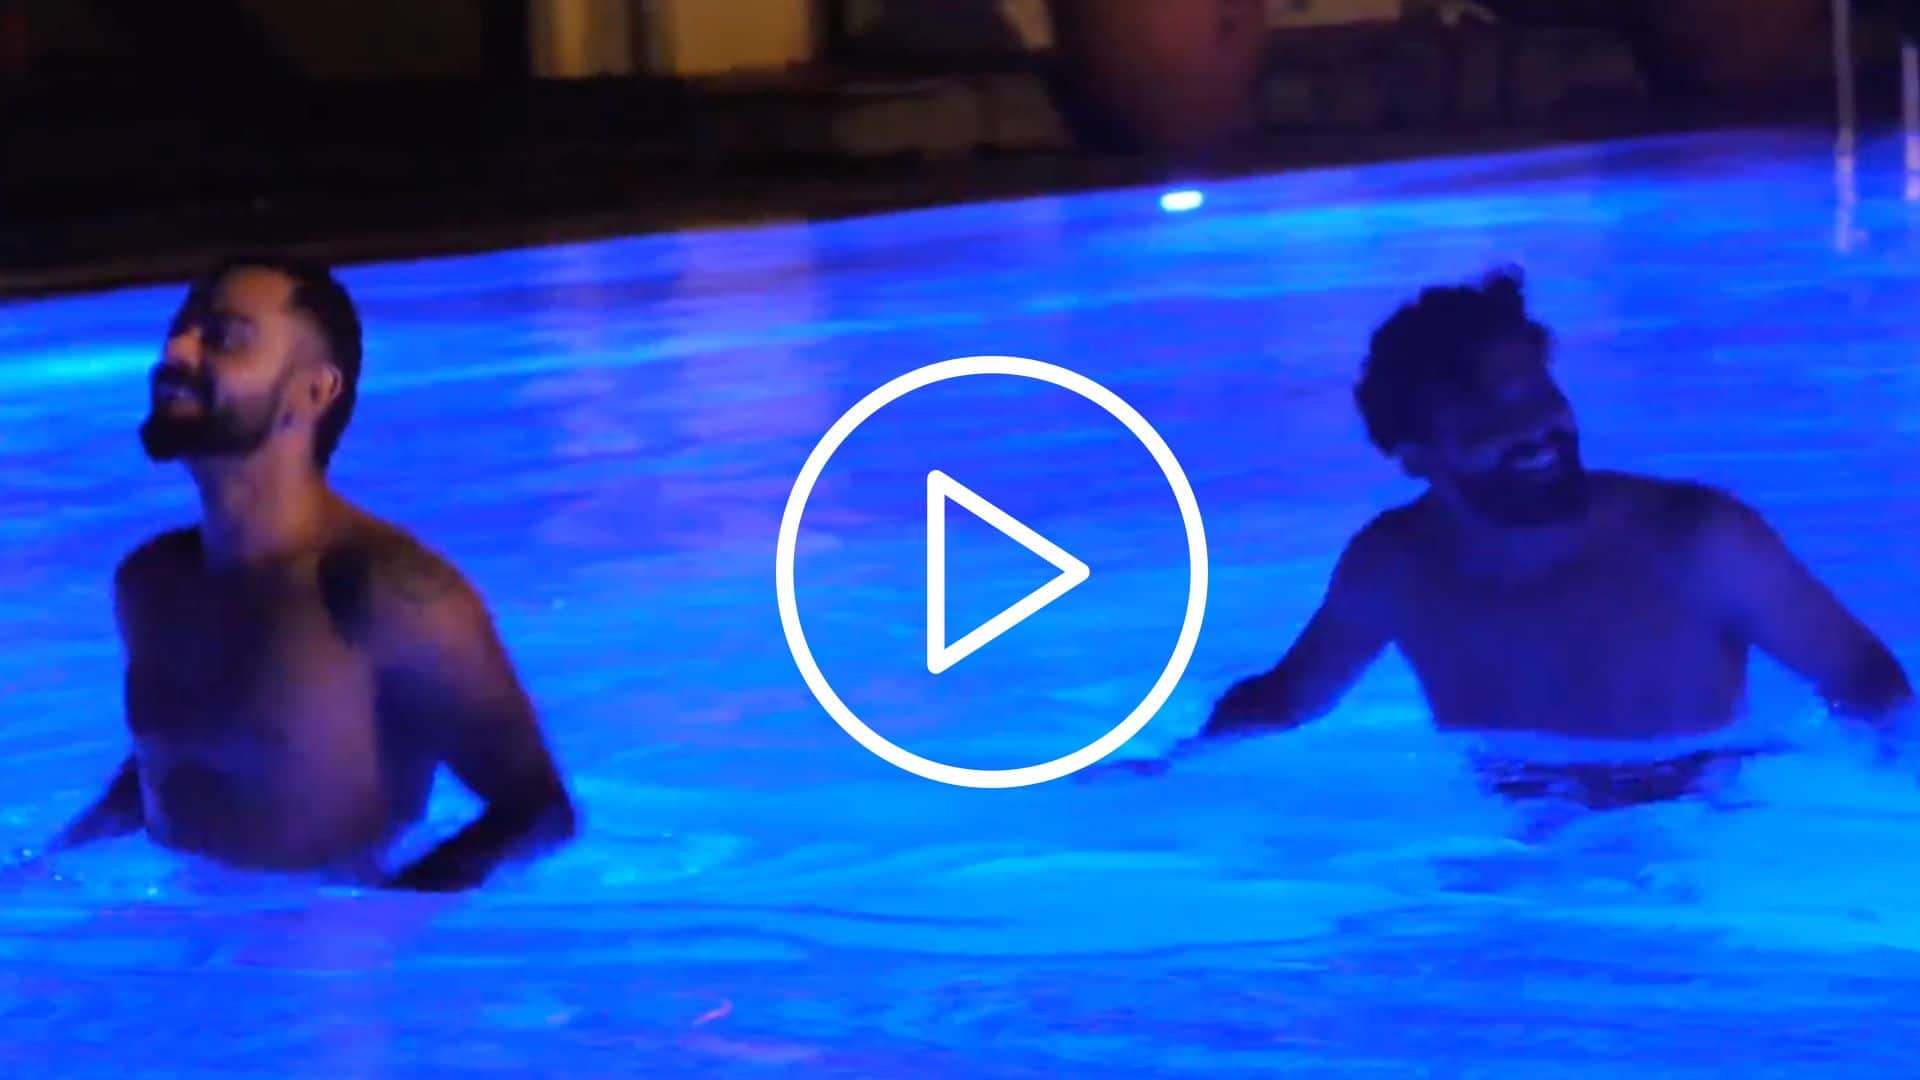 [Watch] Virat Kohli and Rohit Sharma Dance in Pool After India's Thumping Win Vs PAK